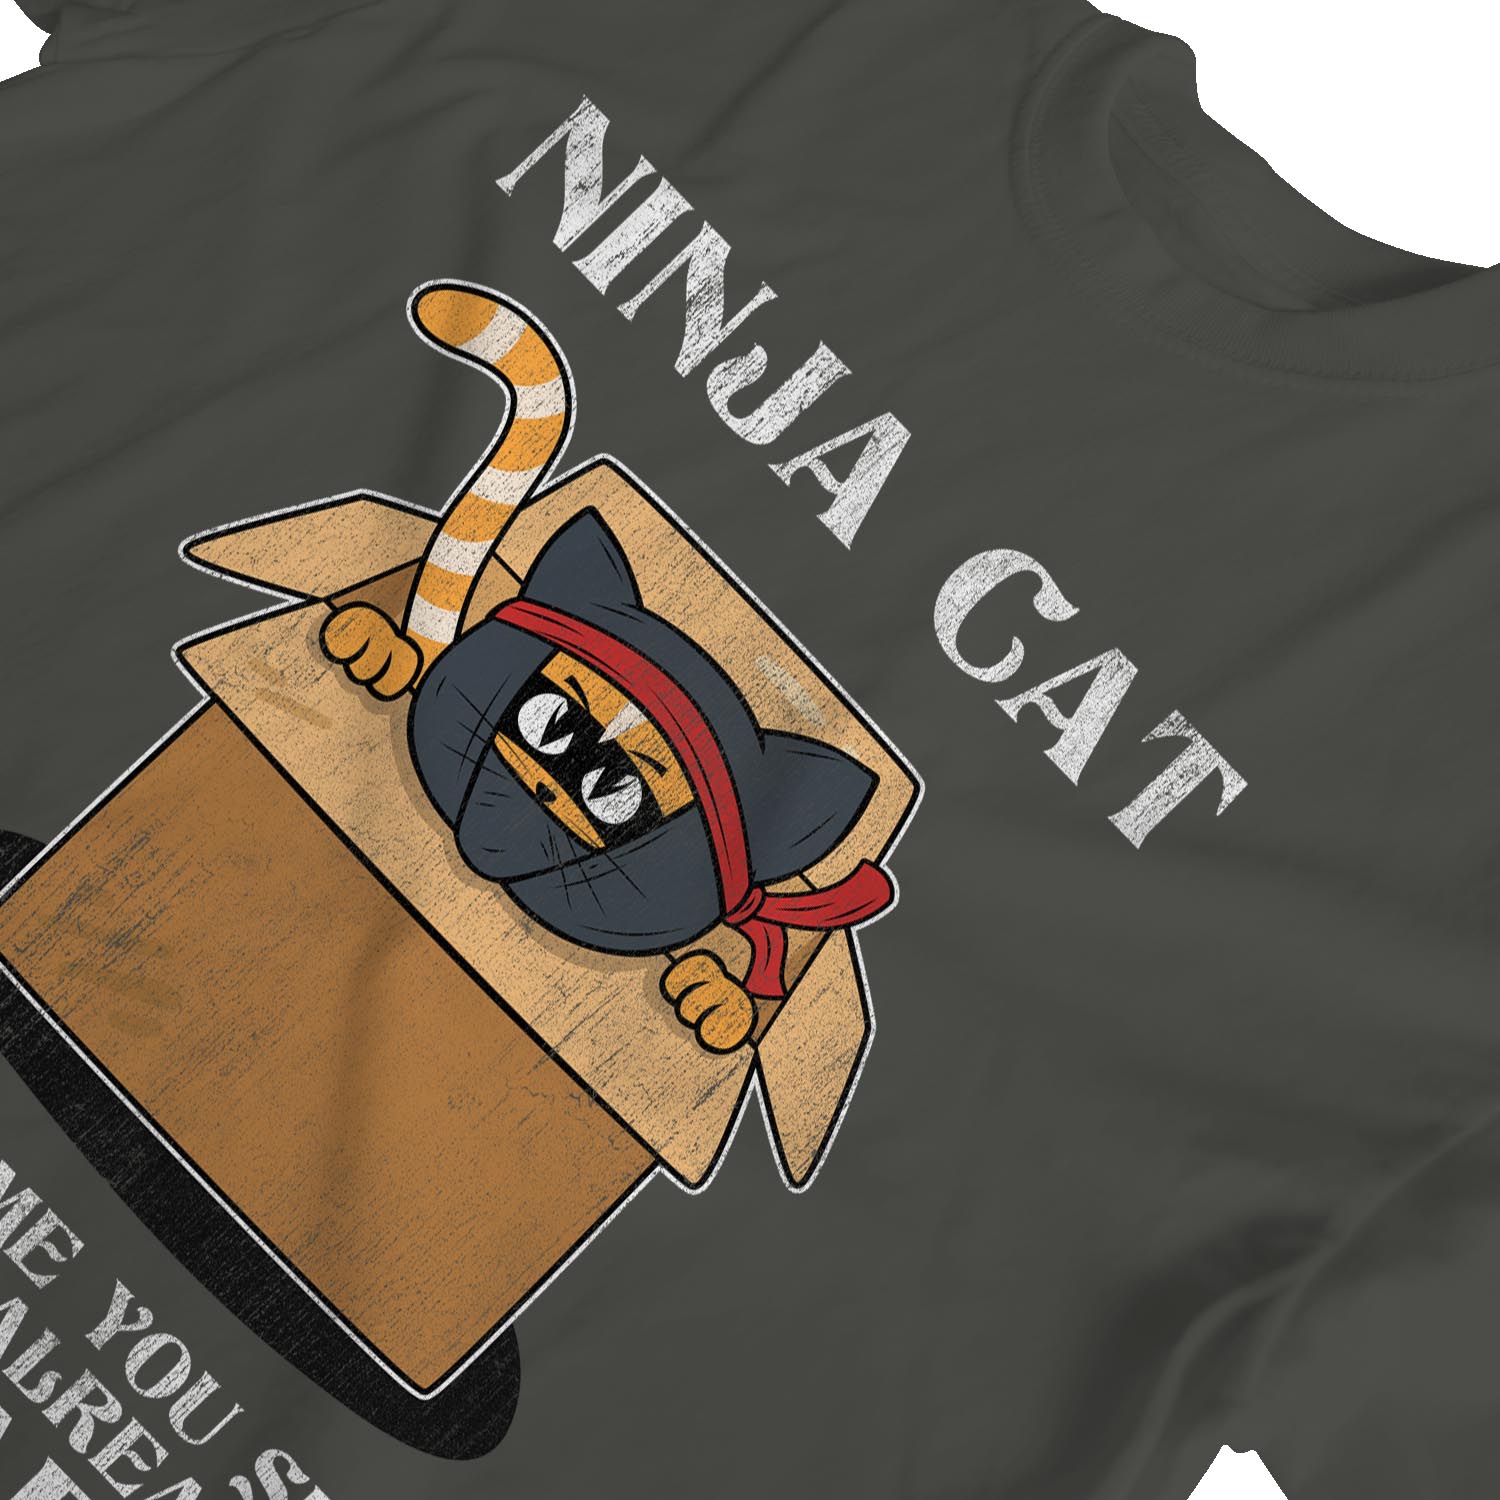 1Tee Womens Loose Fit Ninja Cat By The Time You See It You're Dead T-Shirt